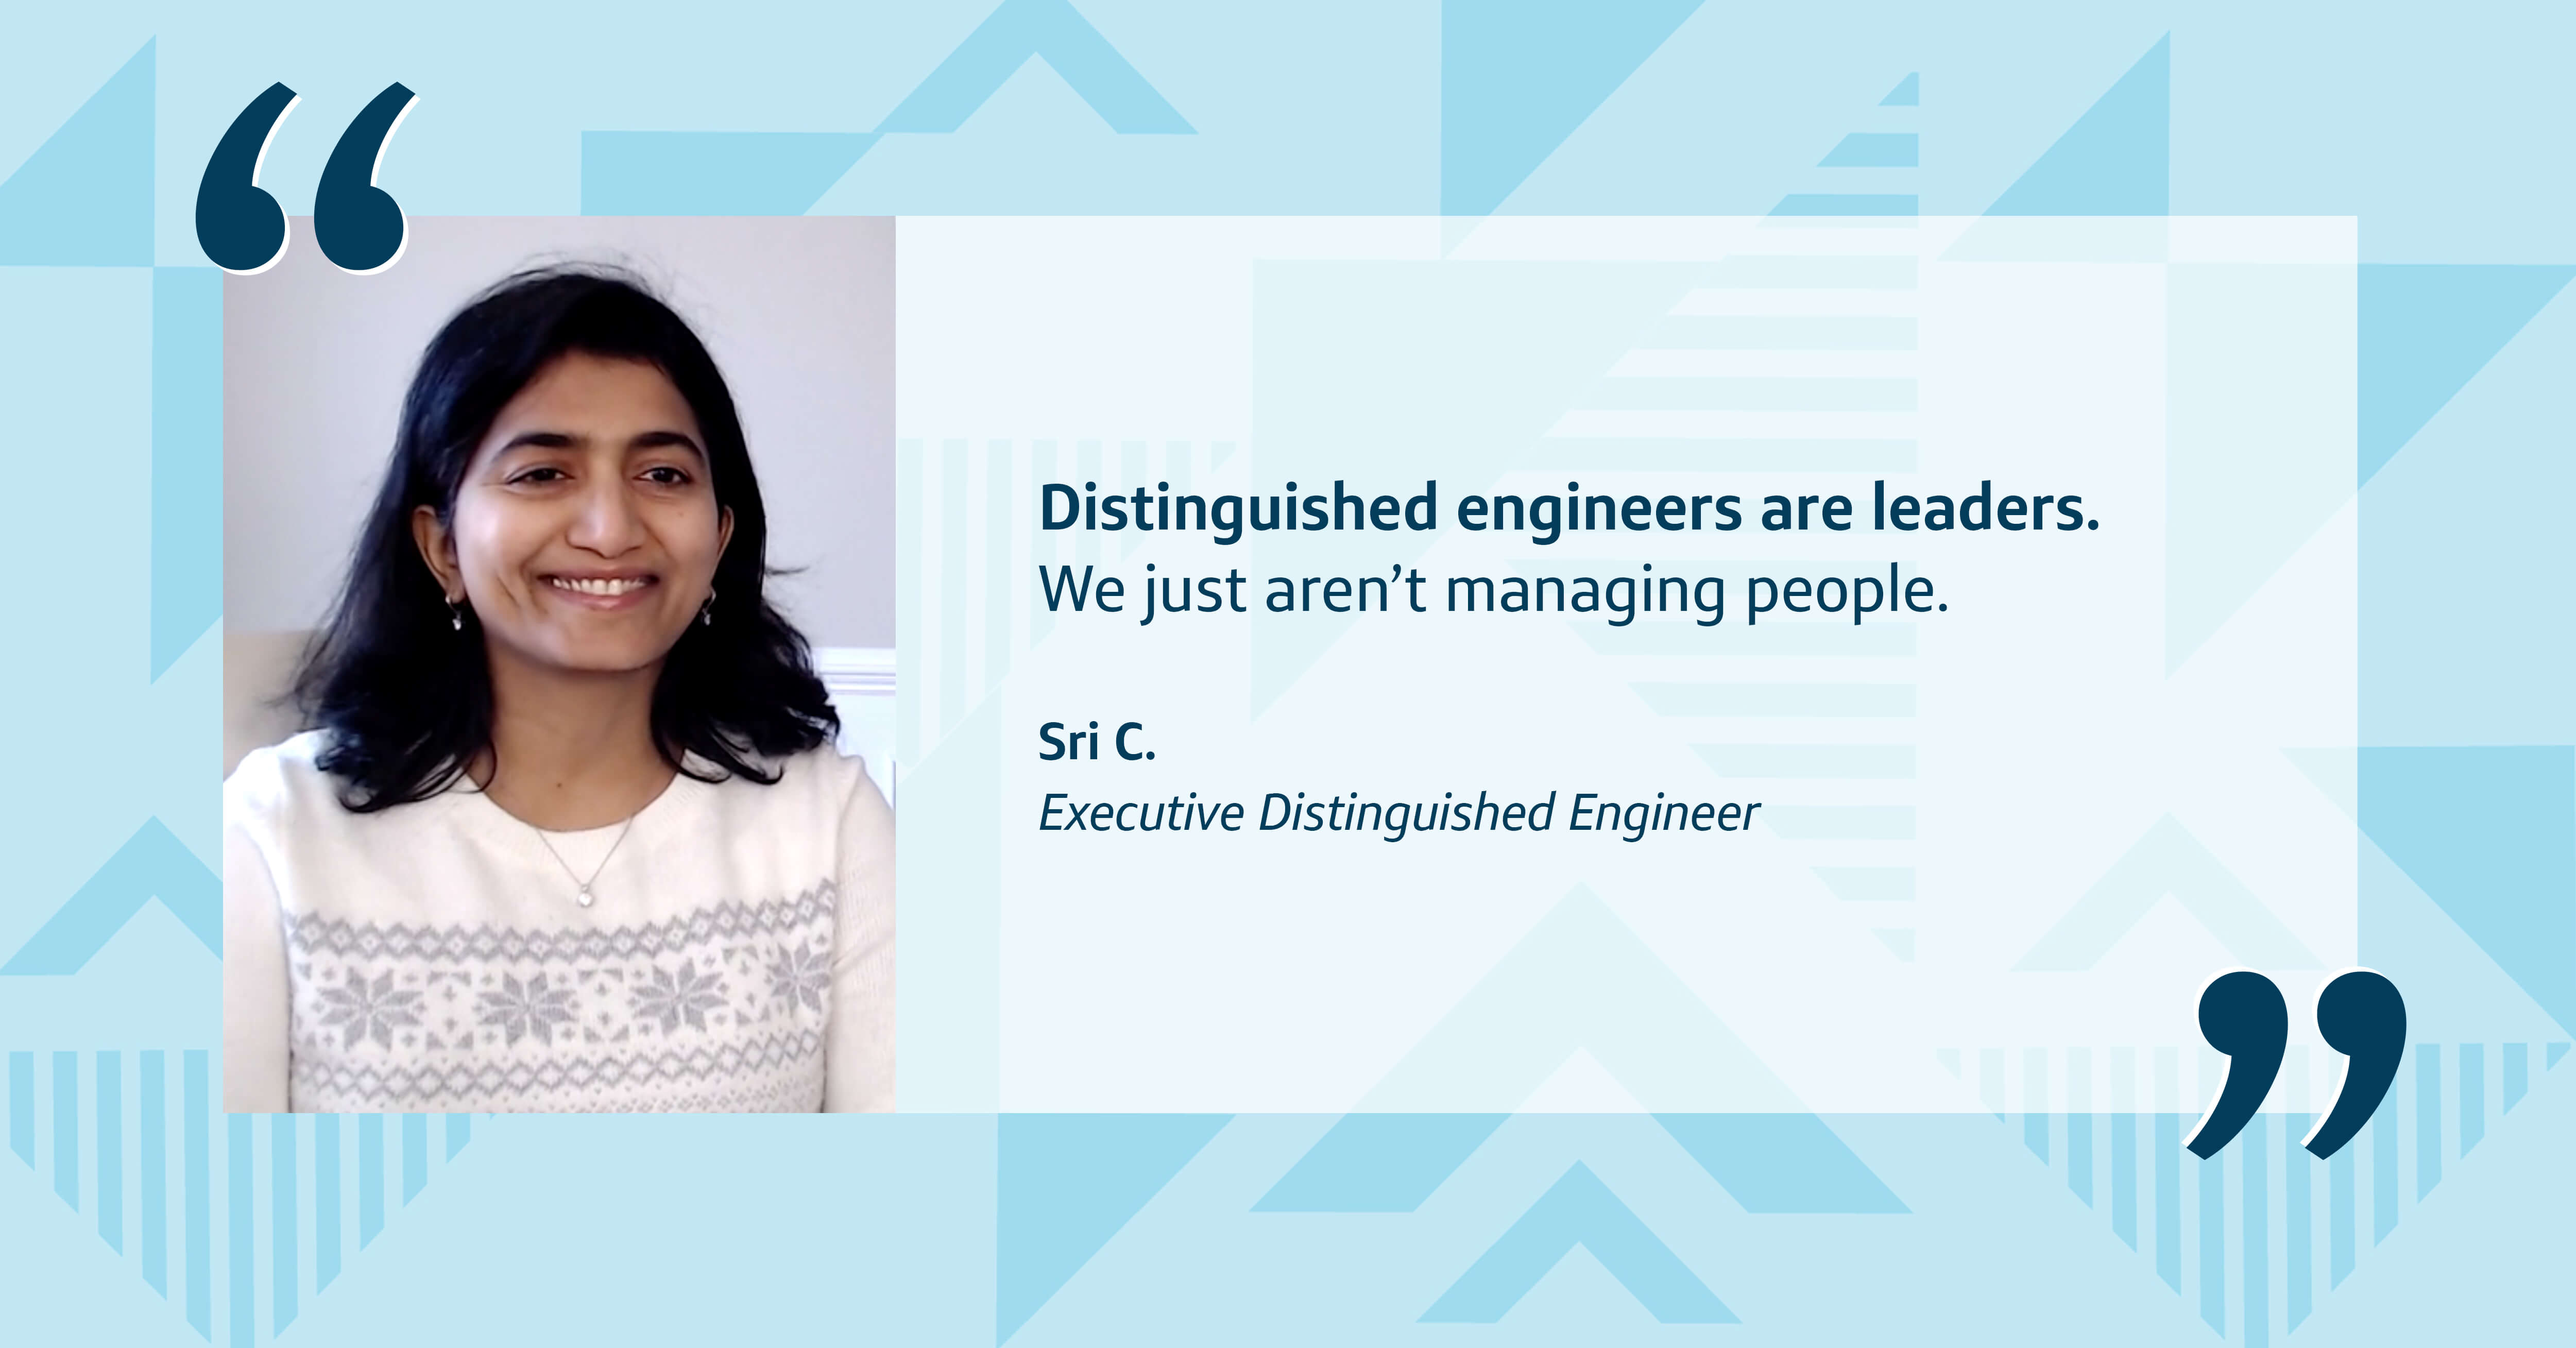 A picture of Capital One associate Sri, with a blue patterned background and a quote from her that says, “Distinguished Engineers are leaders. We just aren’t managing people.” - Sri C., Executive Distinguished Engineer